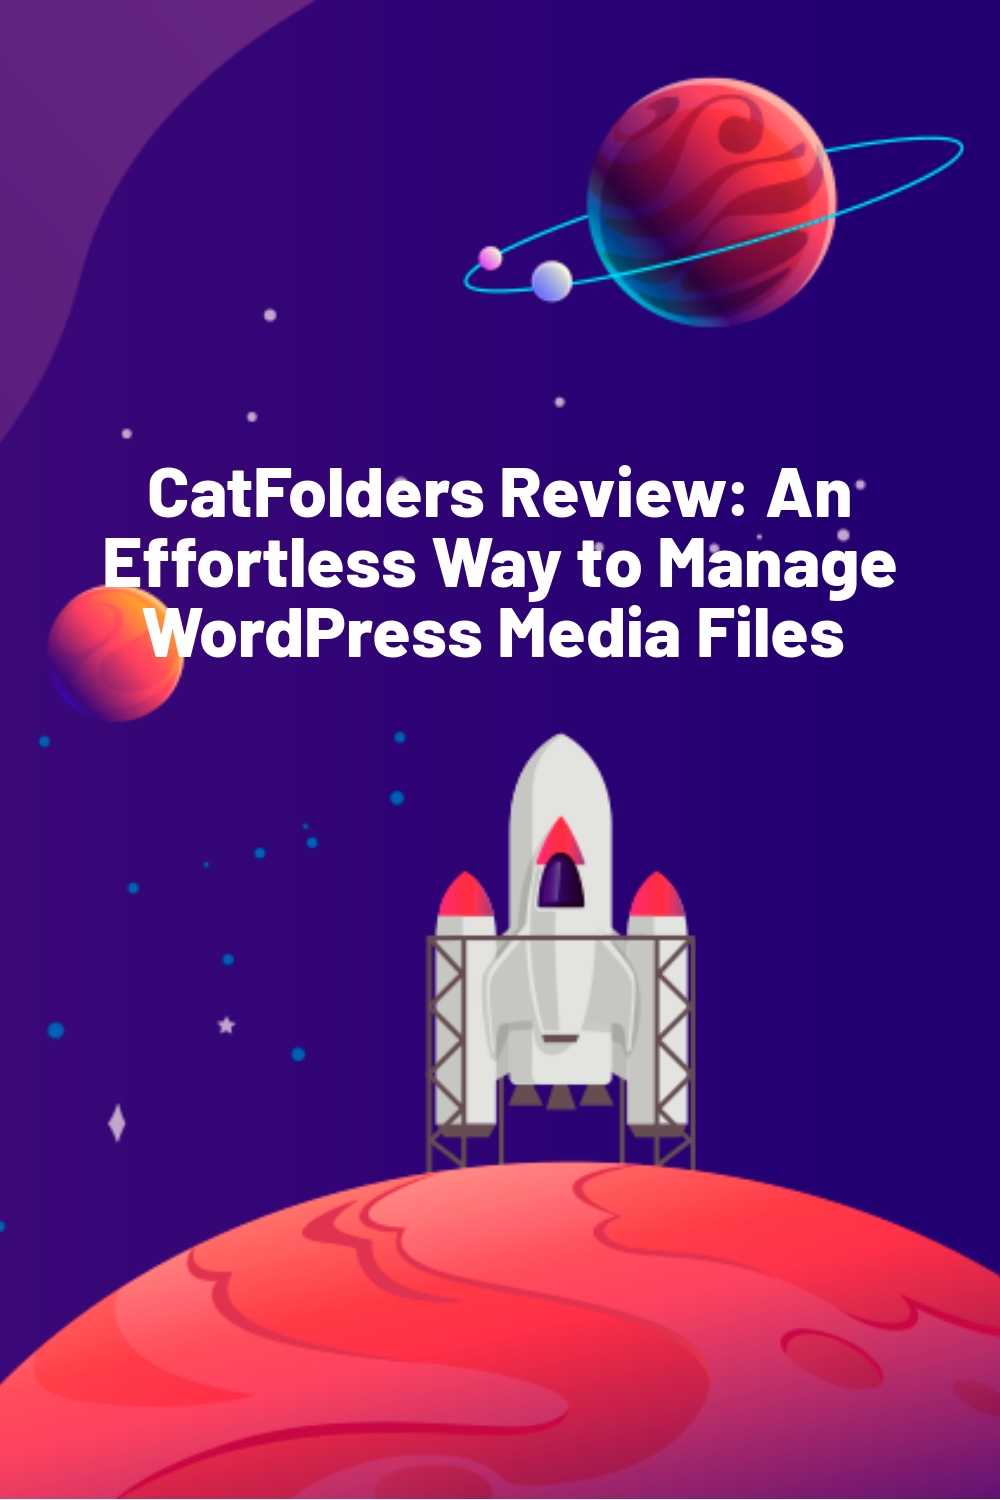 CatFolders Review: An Effortless Way to Manage WordPress Media Files 